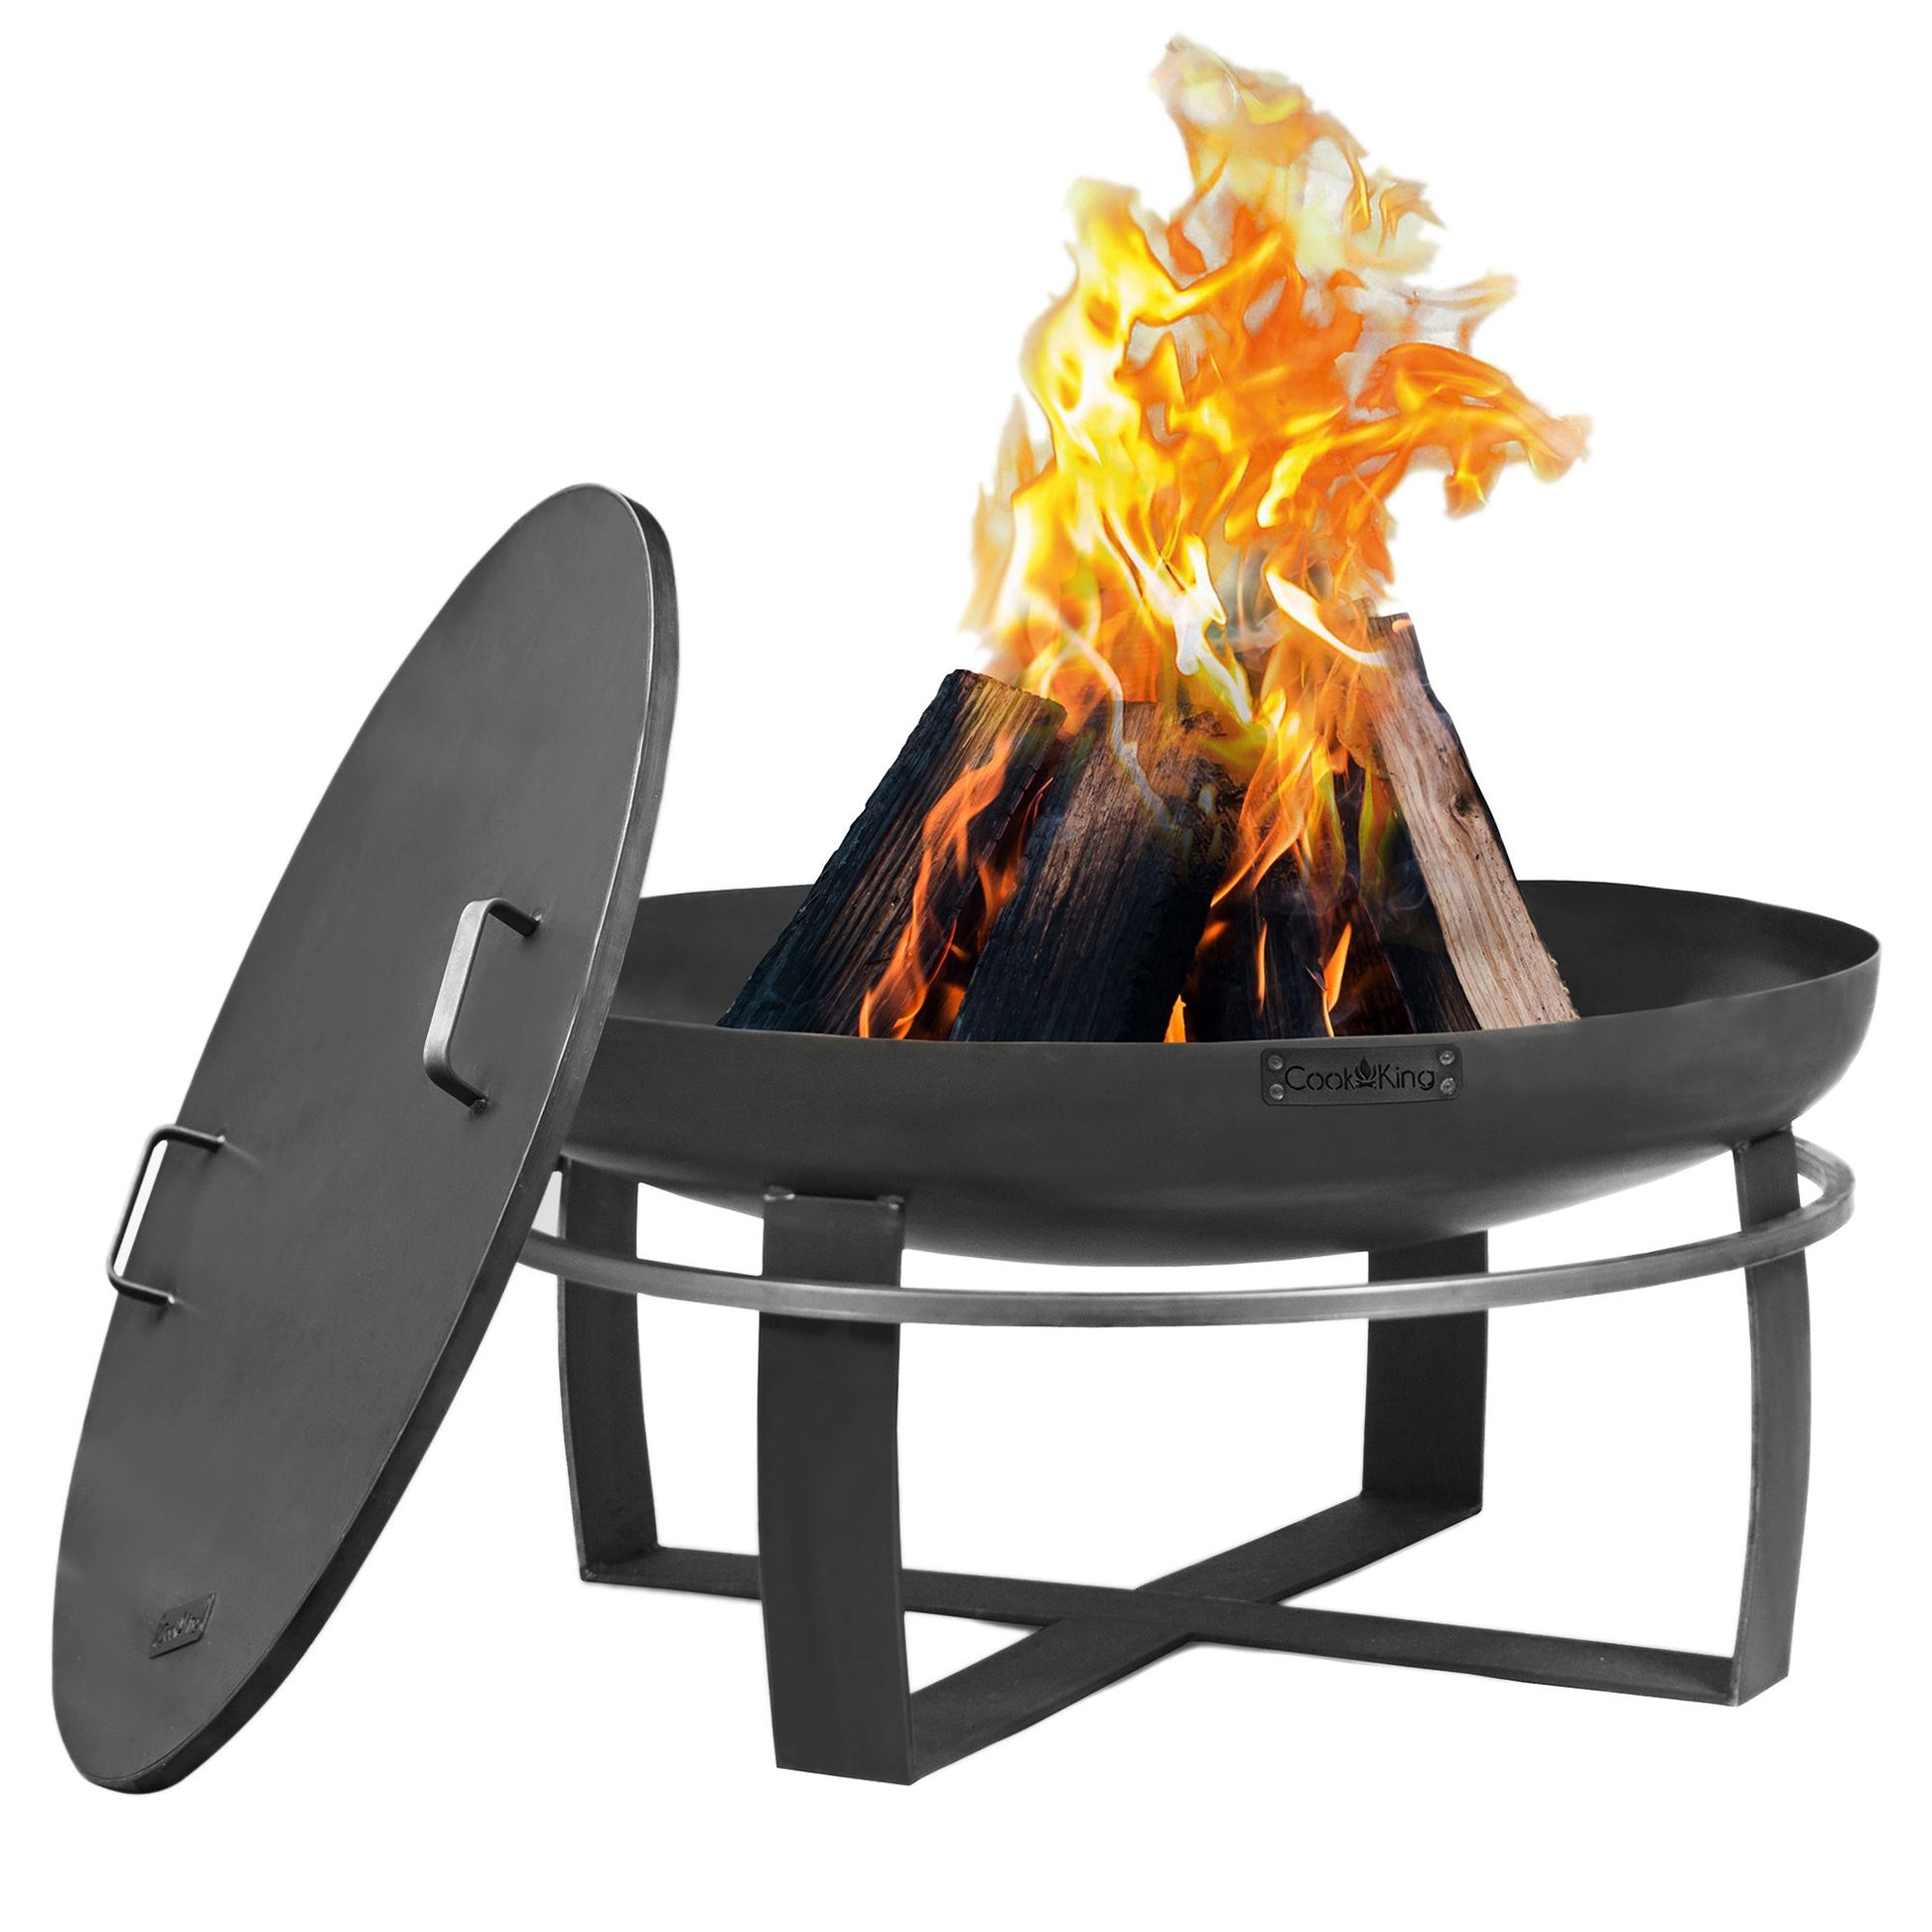 Ignition 32" Fire Pit with Cover Lid - Good Directions